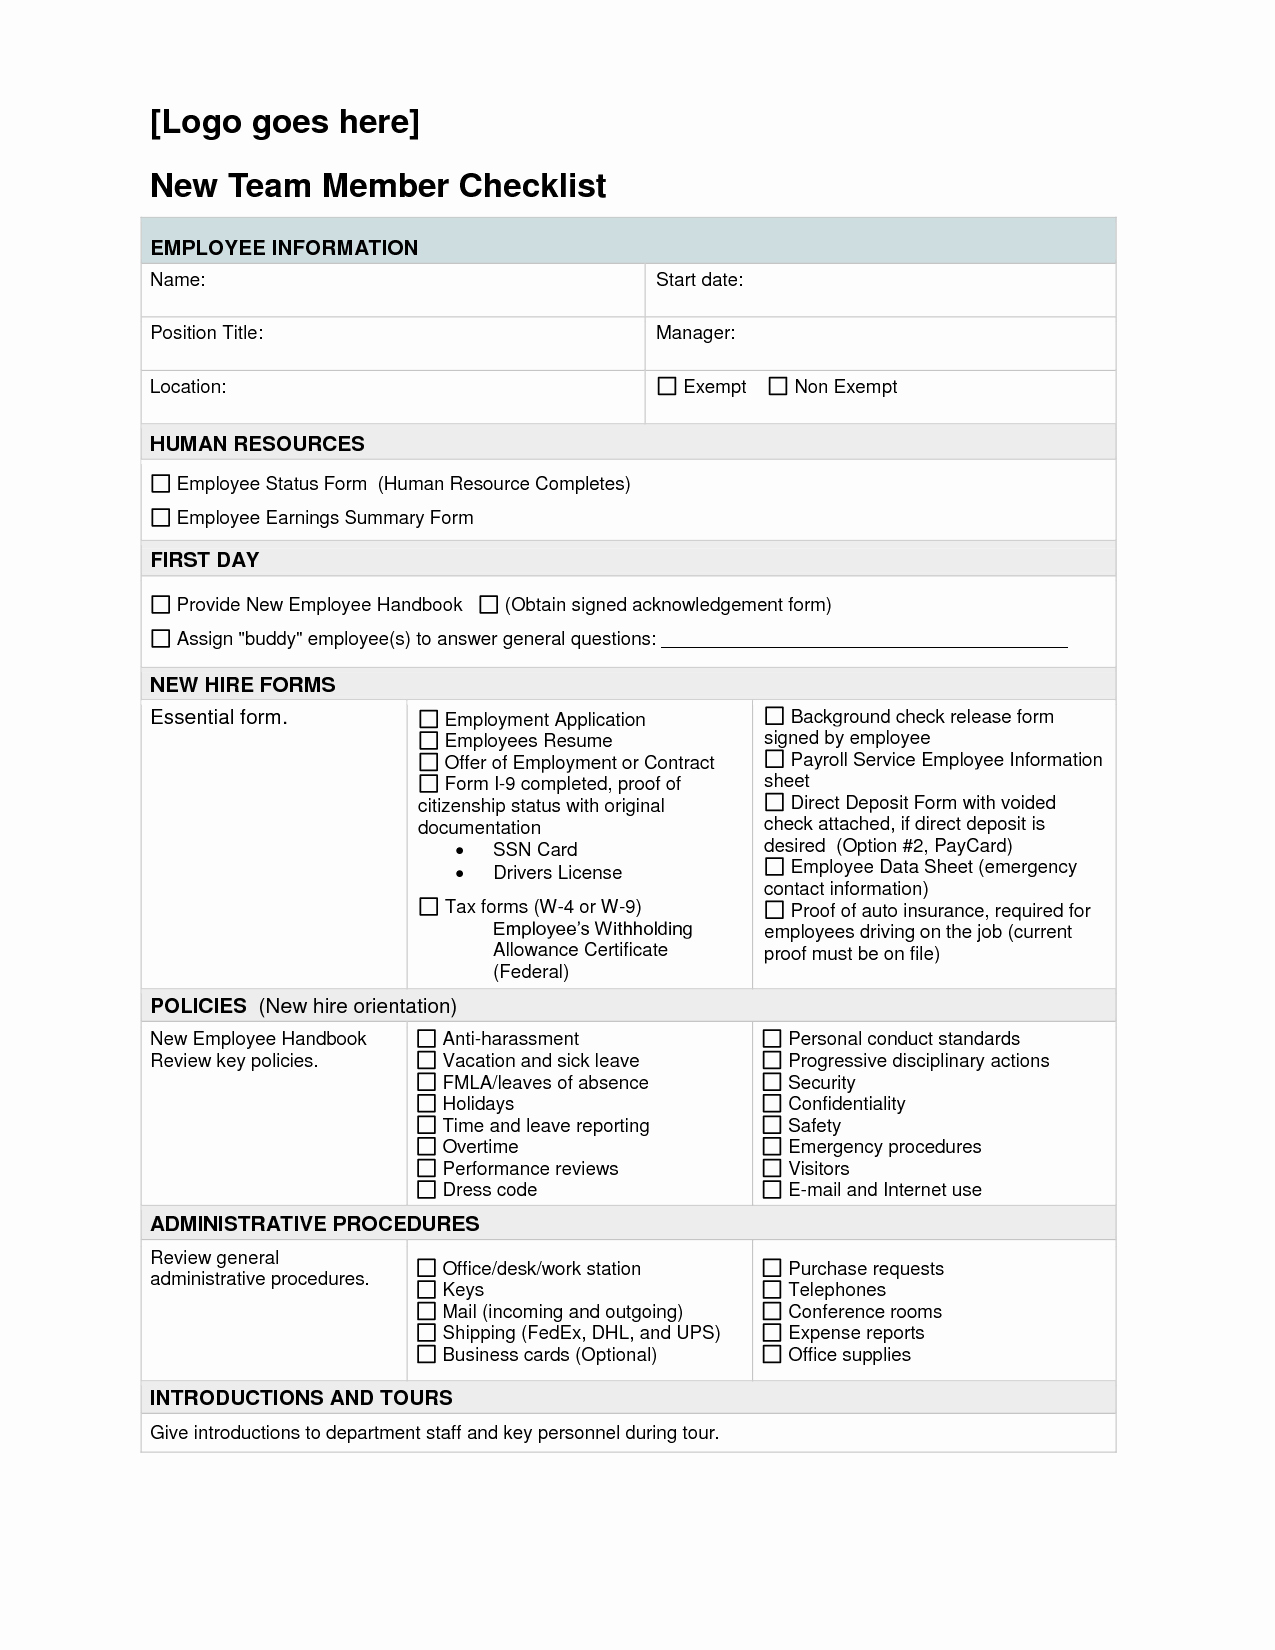 New Hire Checklist Template Best Of New Hire Checklist Full Version